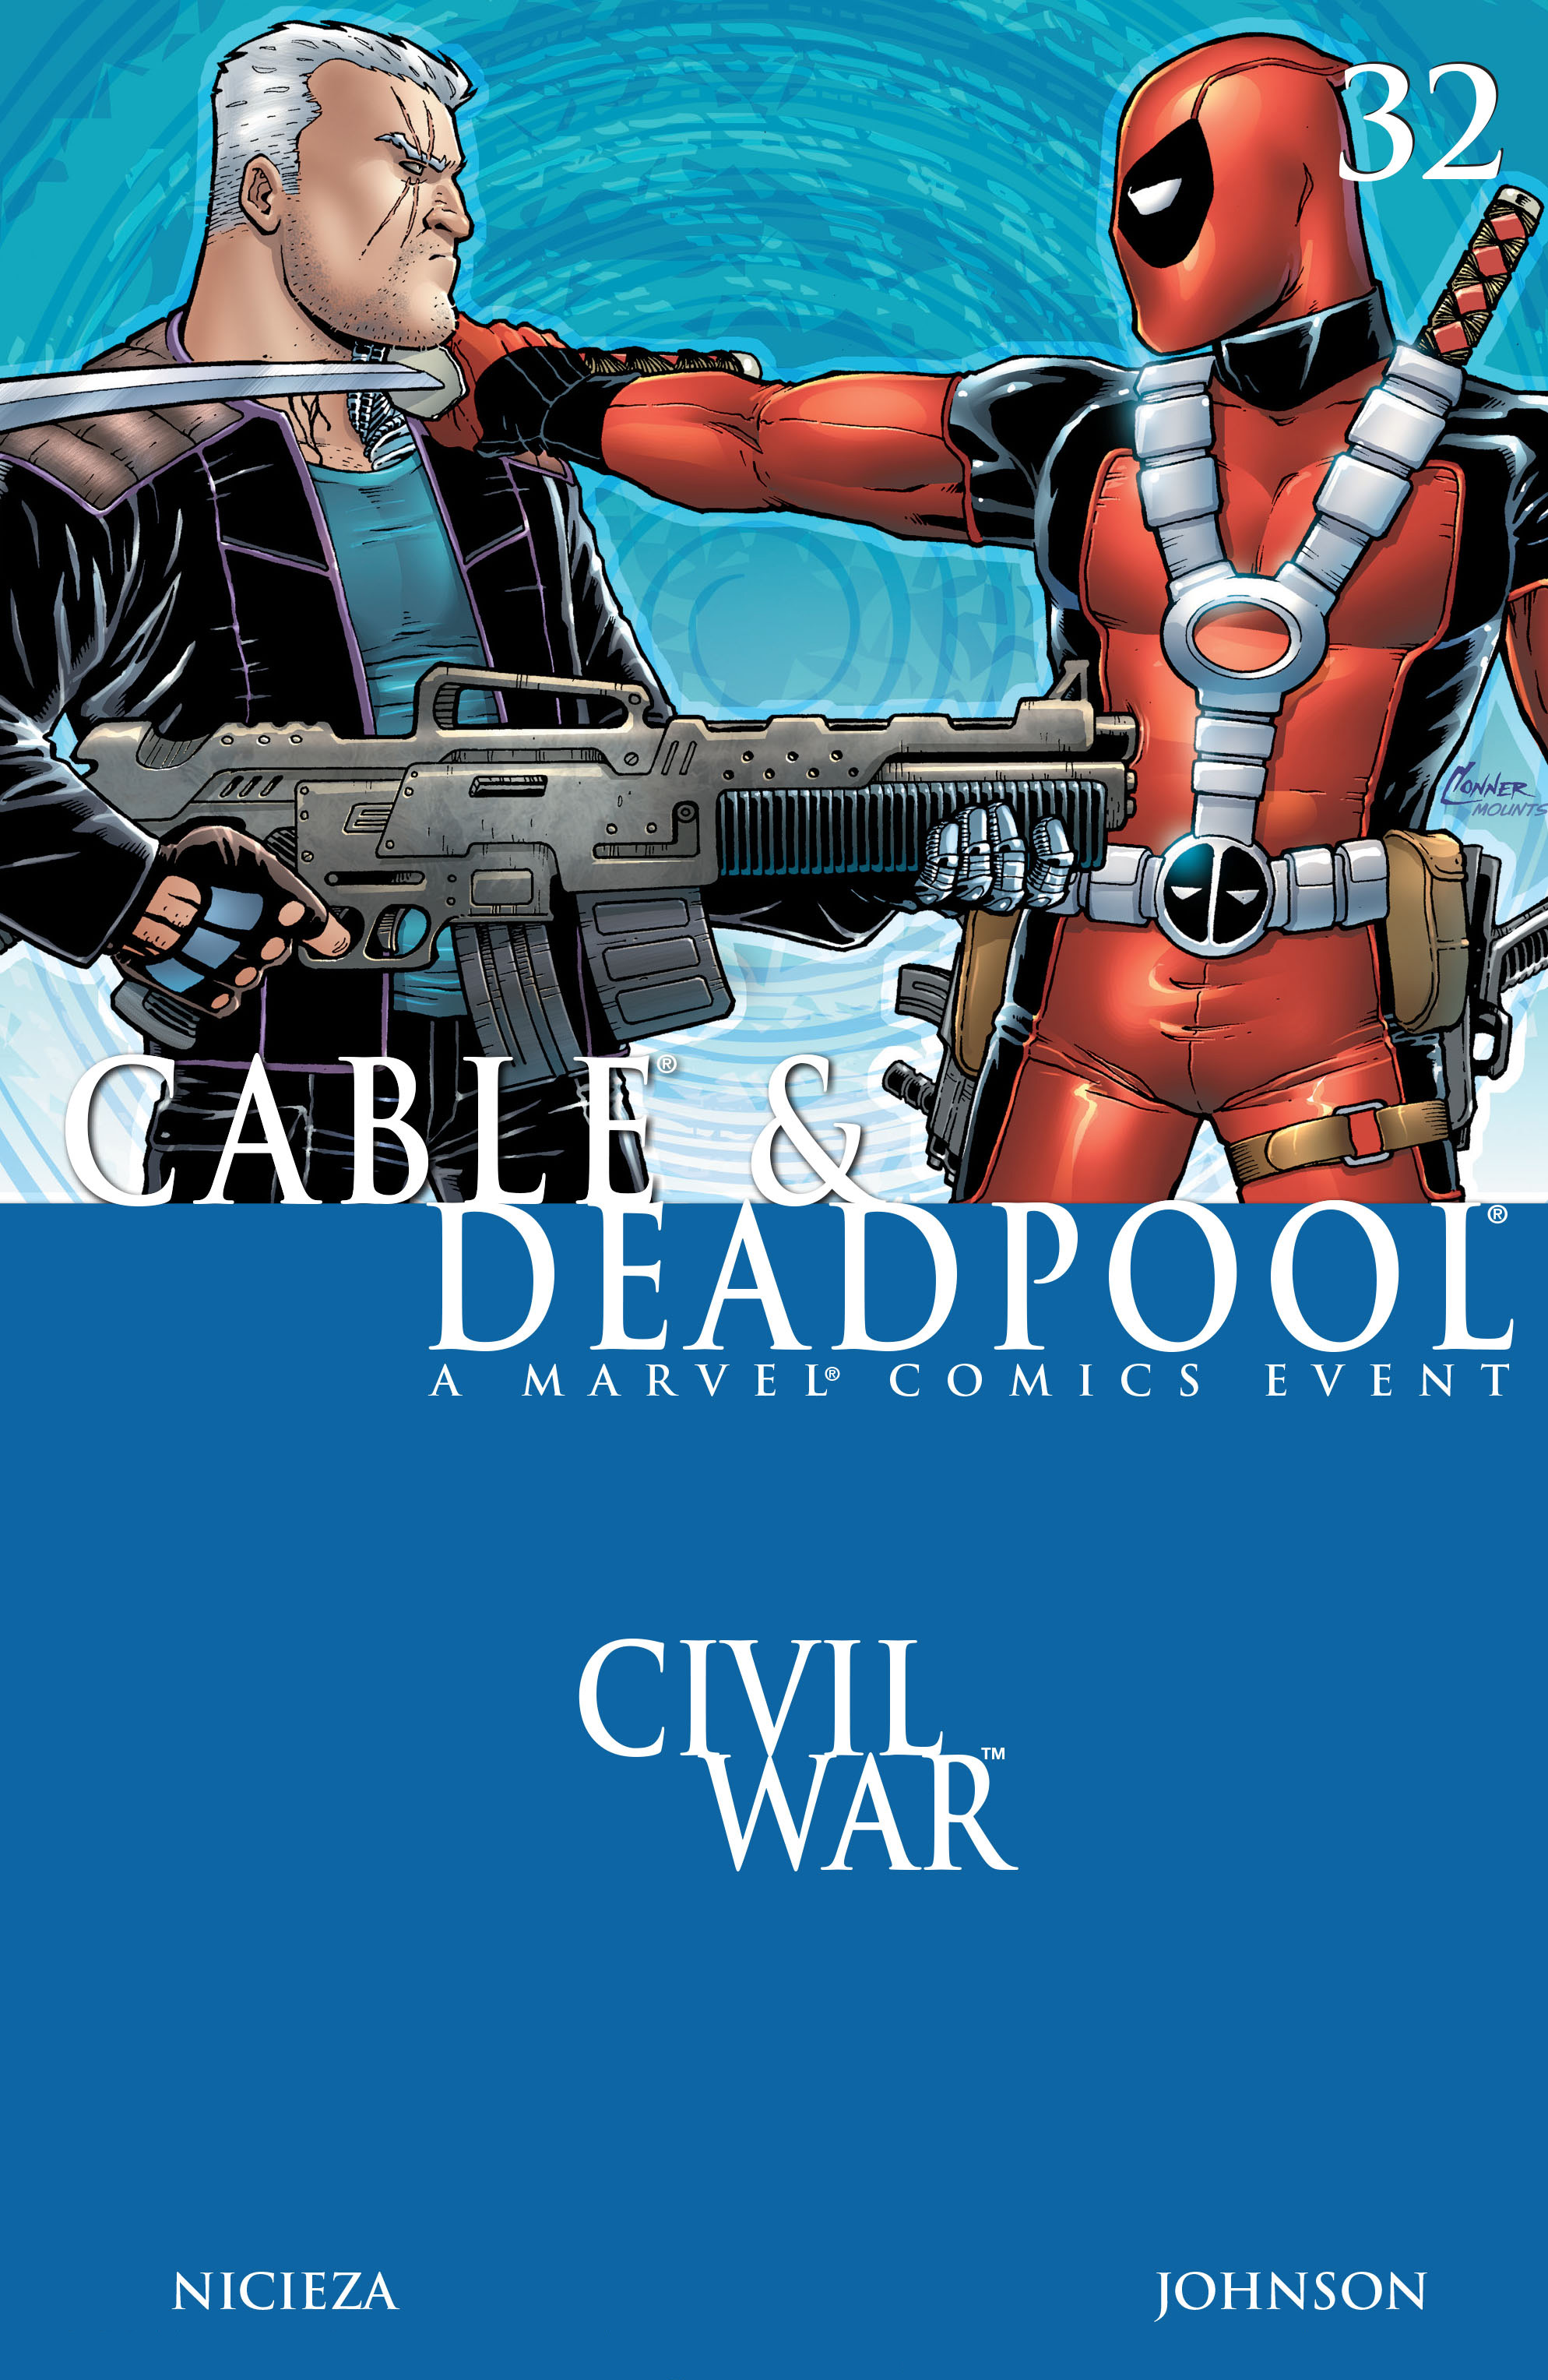 Read online Cable and Deadpool comic -  Issue #32 - 1